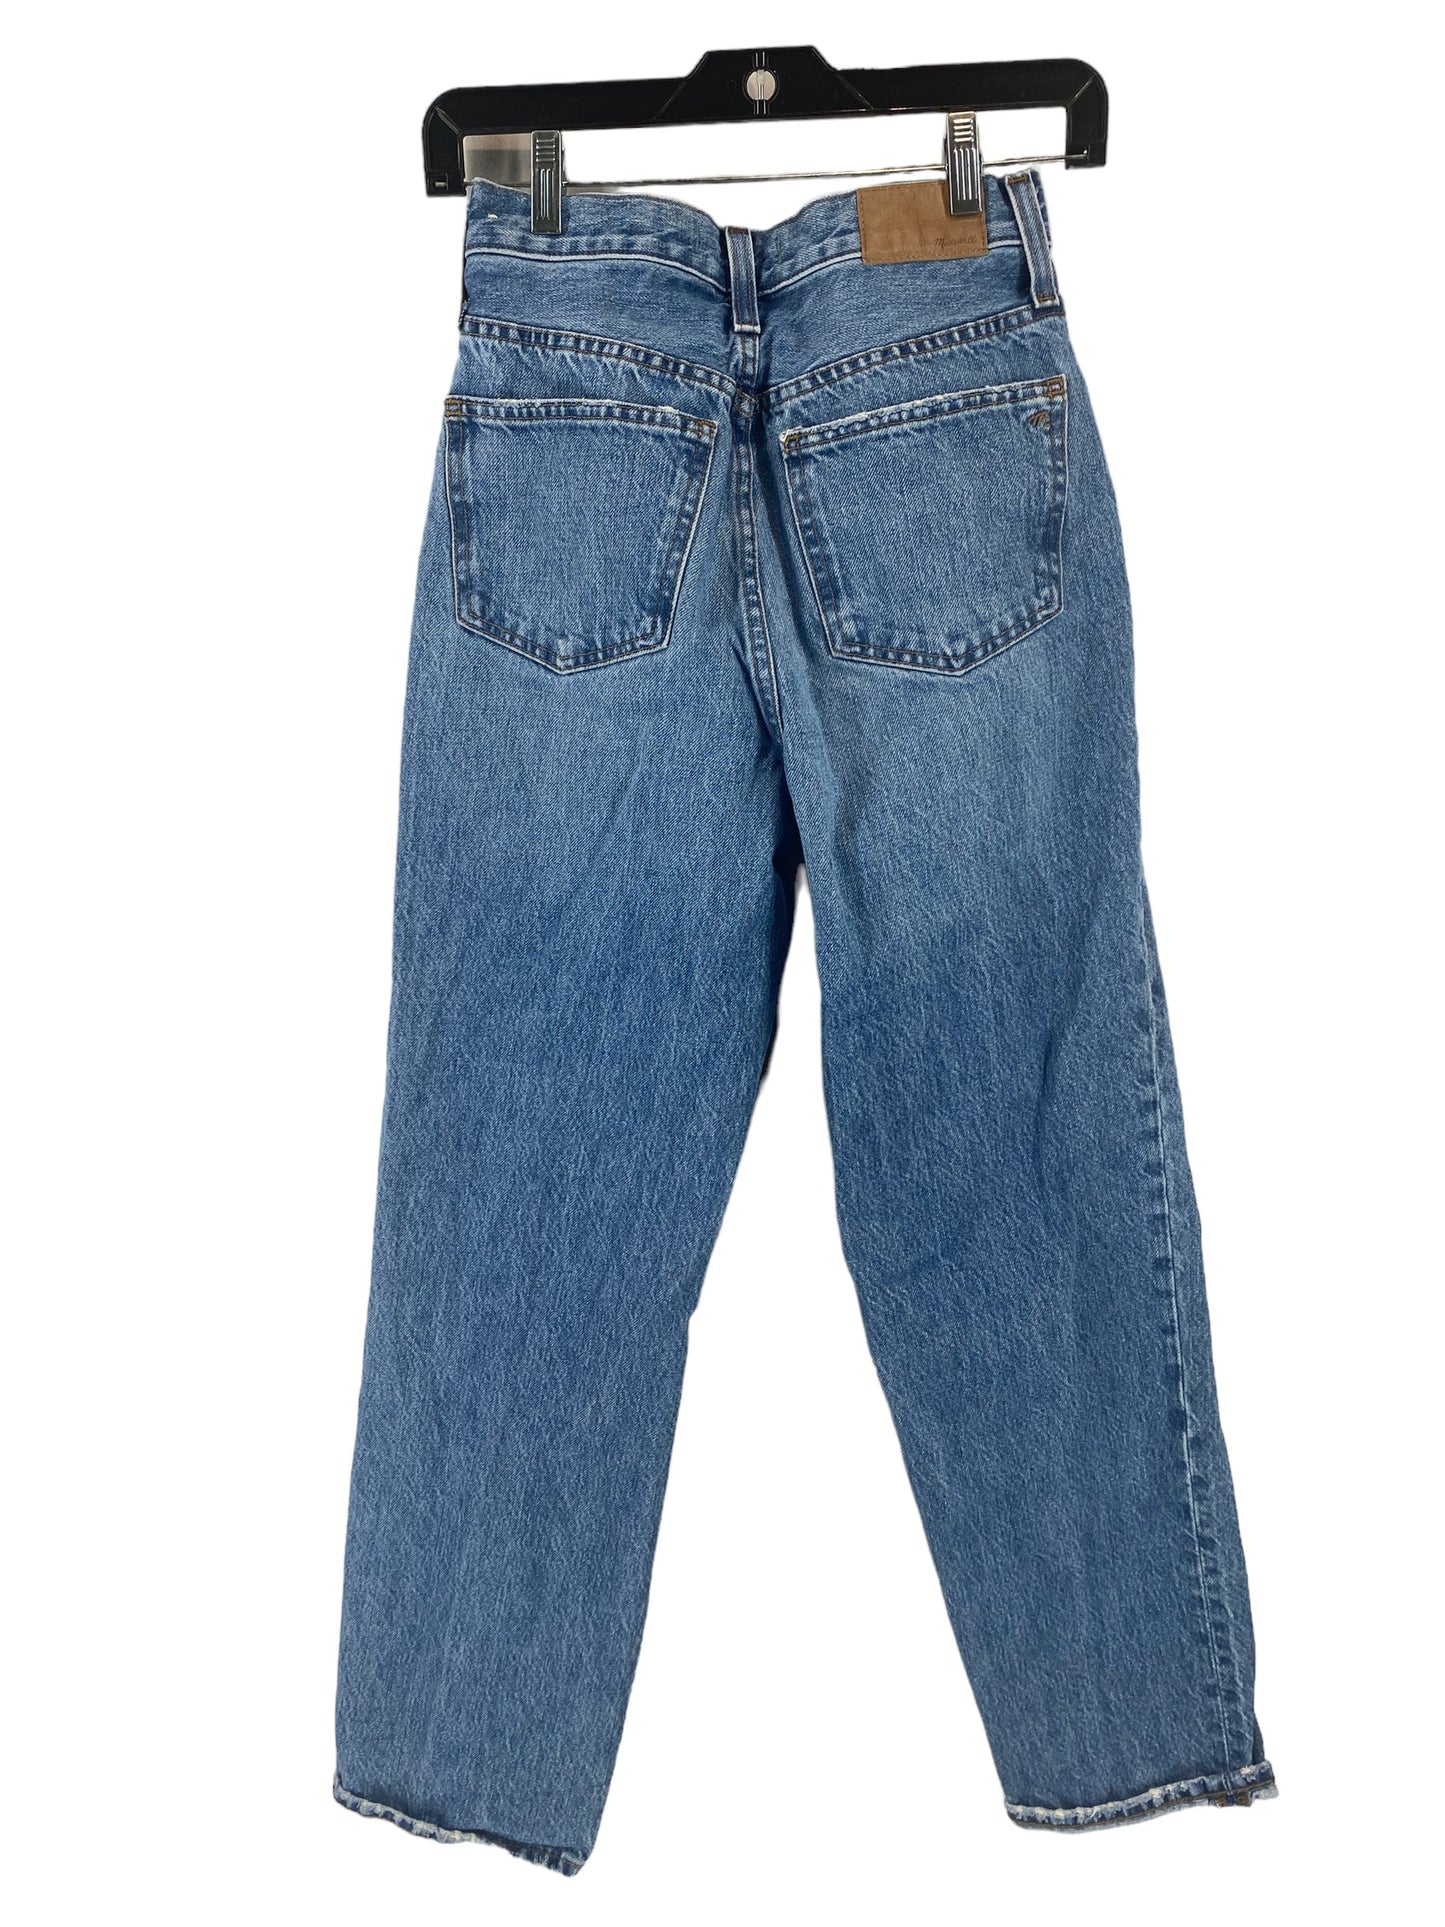 Jeans Relaxed/boyfriend By Madewell  Size: 24